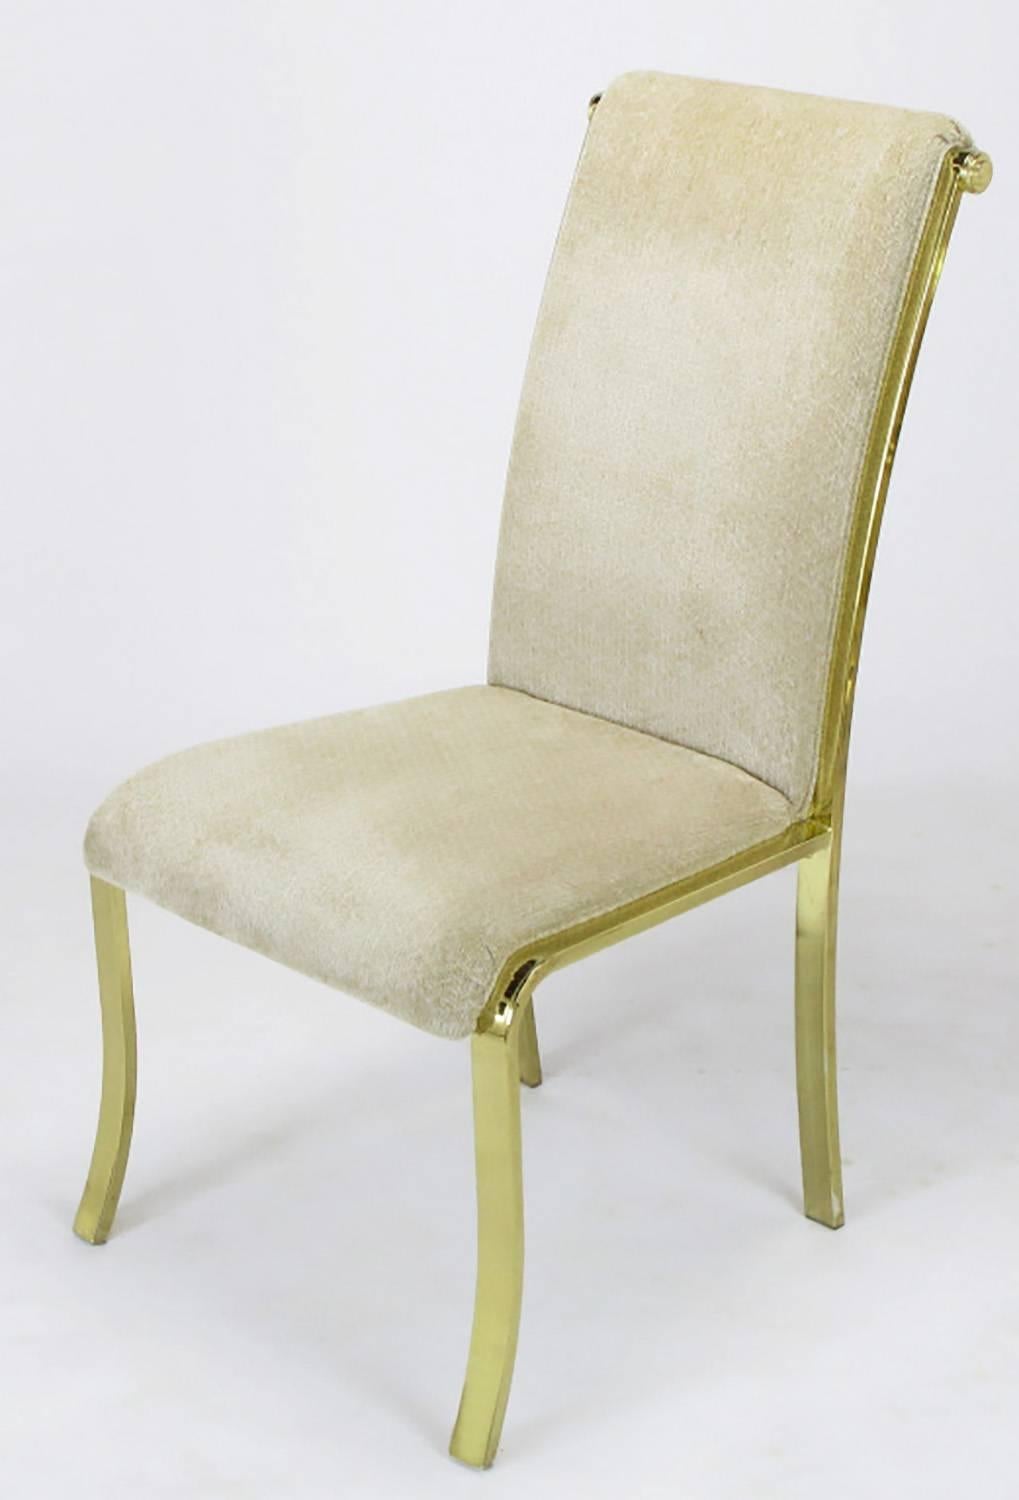 Set of Six Art Deco Revival Brass Dining Chairs by Design Institute of America In Good Condition For Sale In Chicago, IL